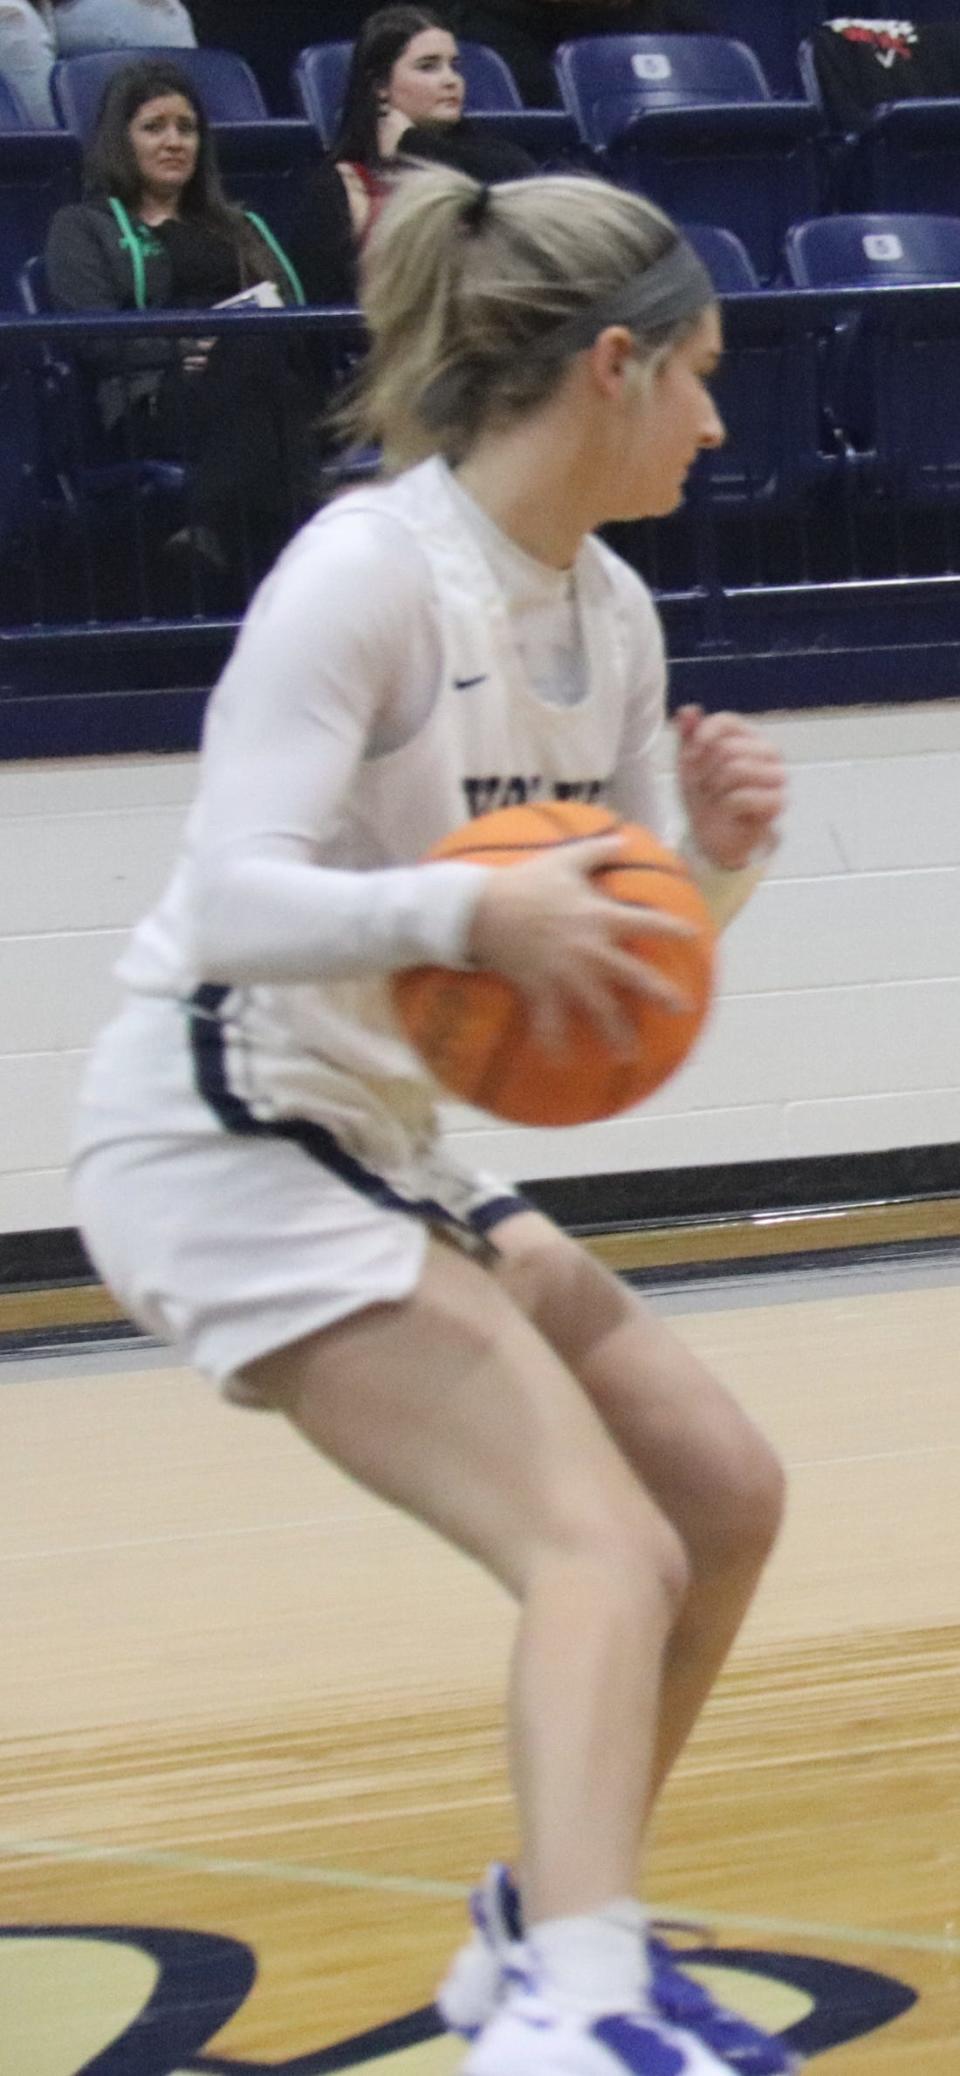 Shawnee's Ansley Orrell possesses the basketball during a recent game.